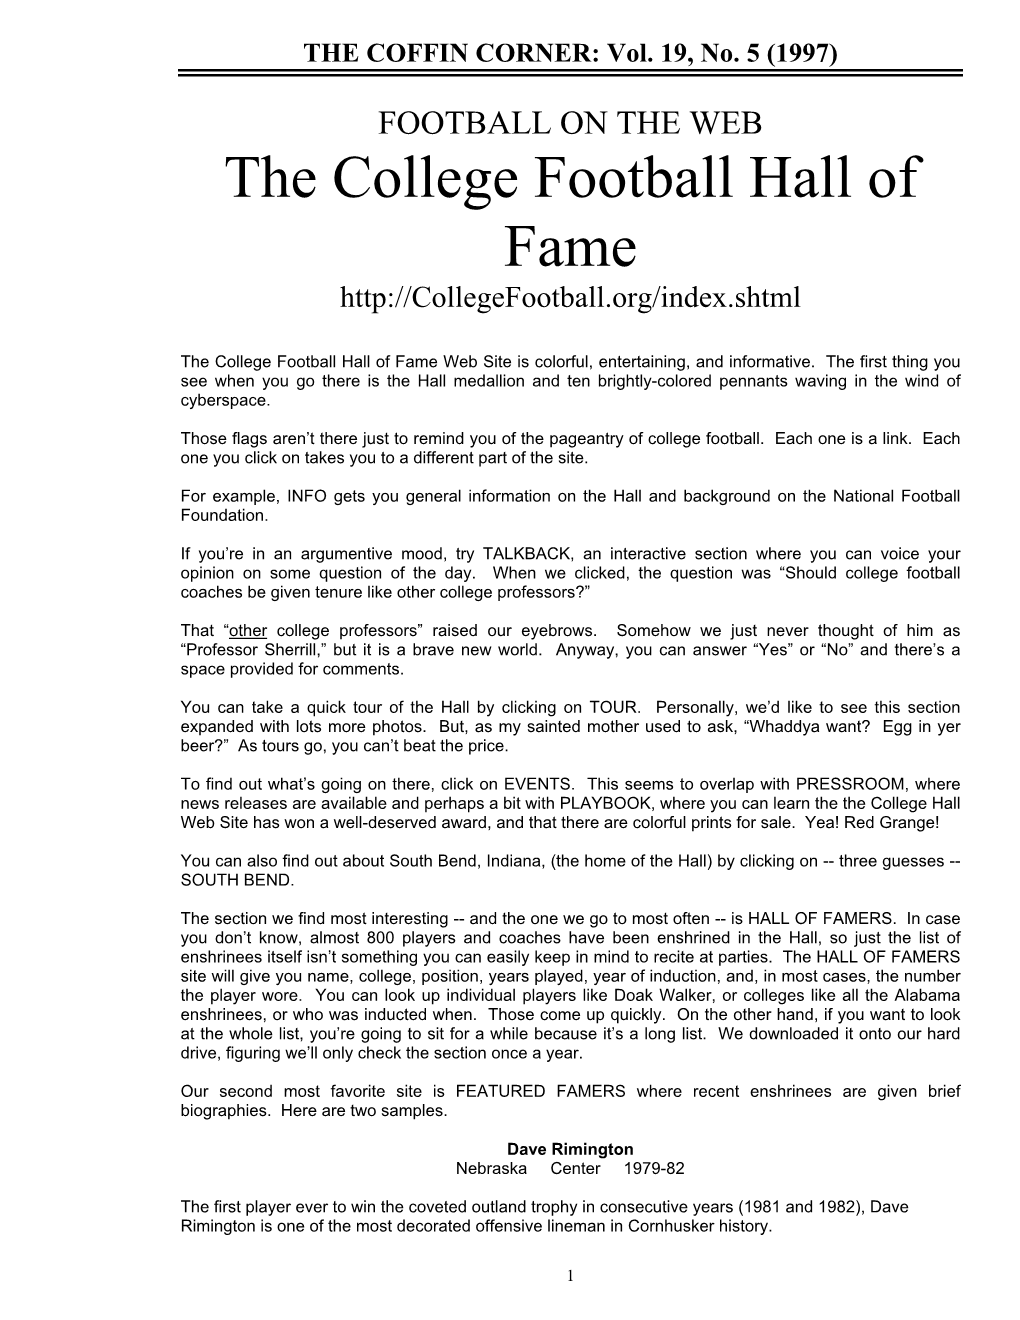 FOOTBALL on the WEB the College Football Hall of Fame